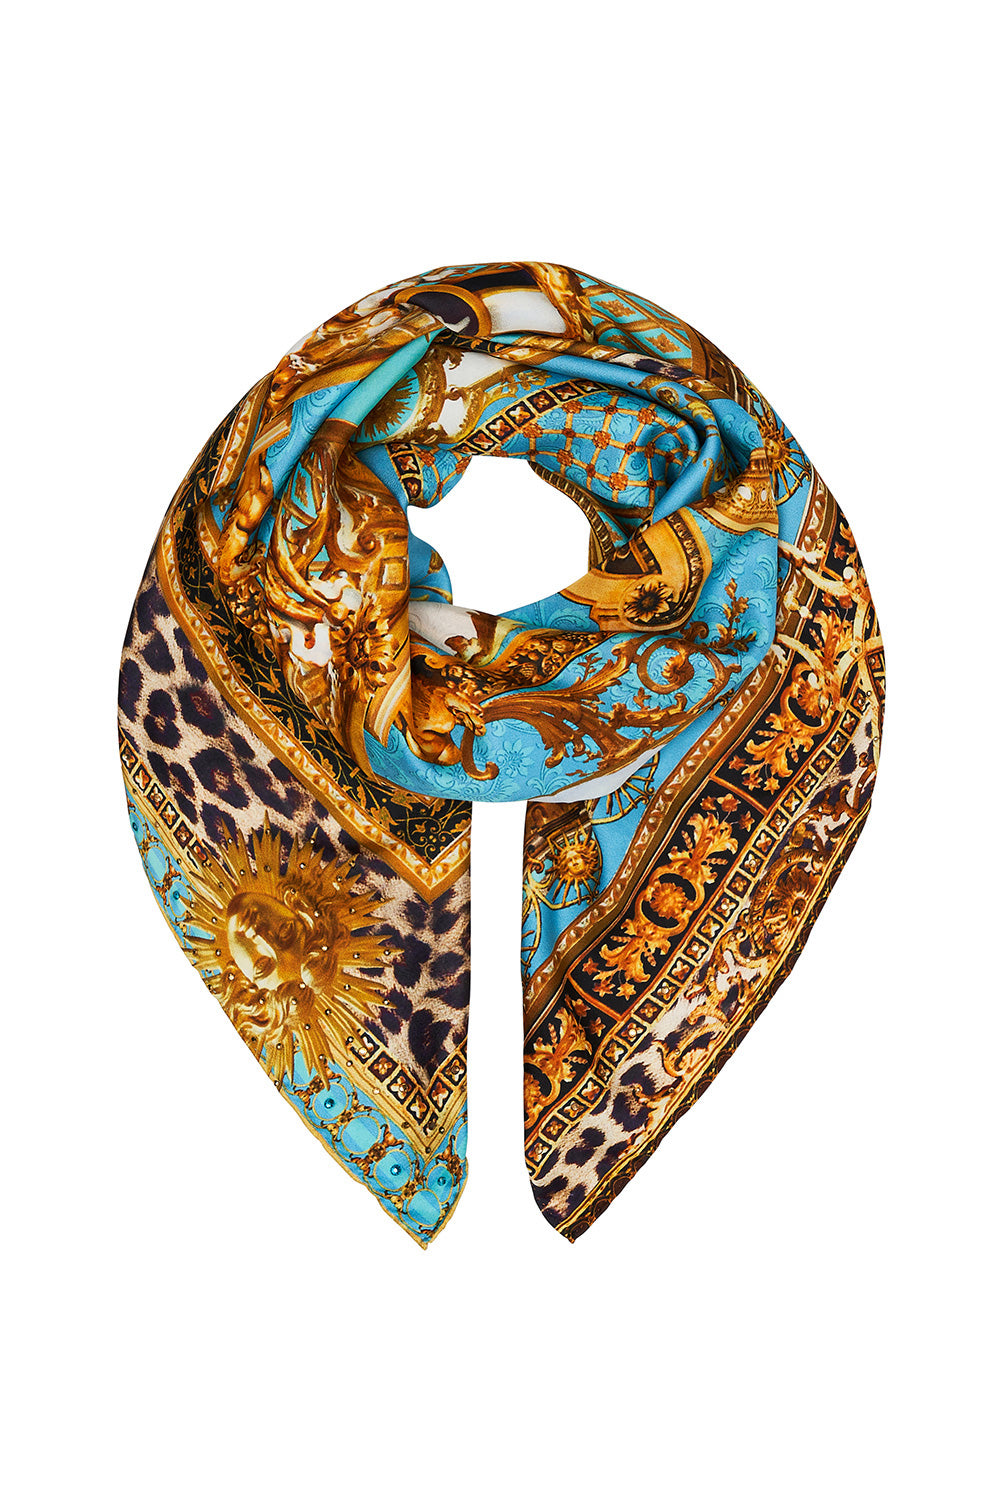 LARGE SQUARE SCARF DRIPPING IN DECADENCE